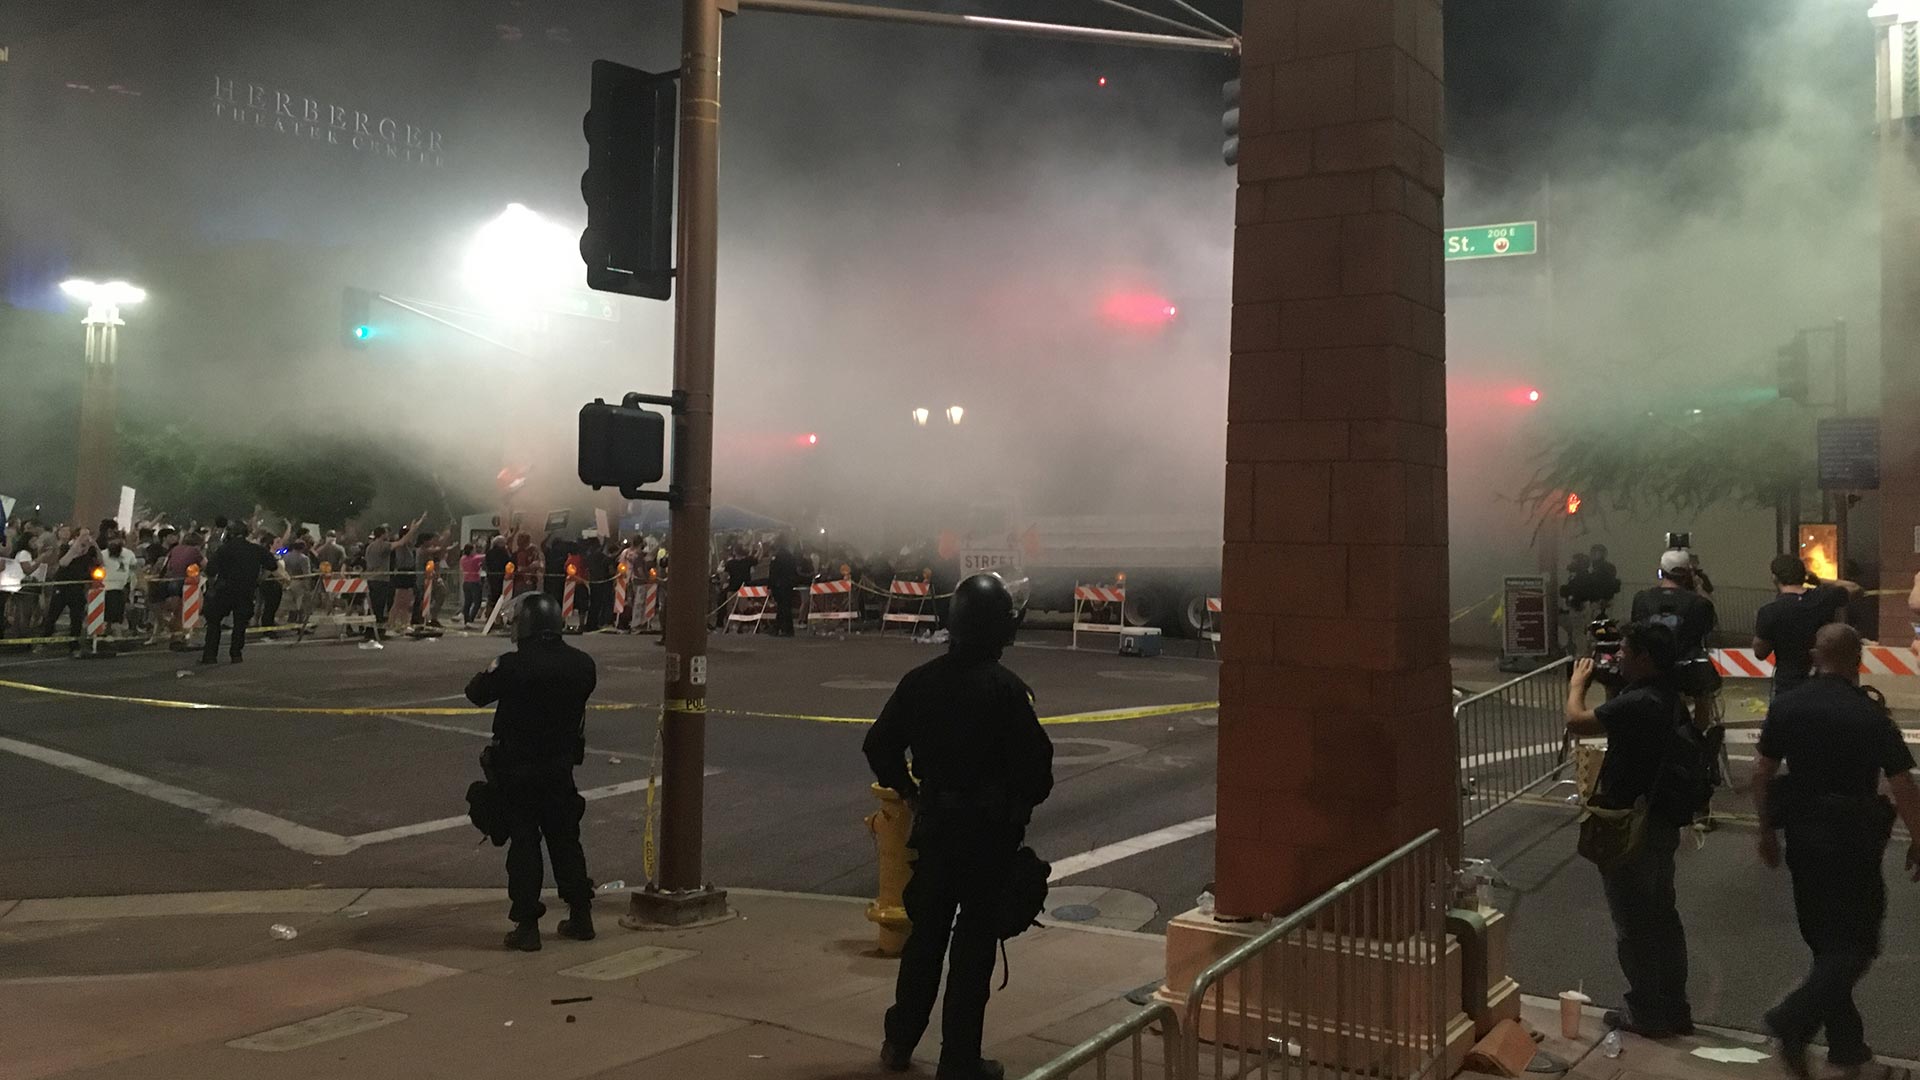 Tear gas was used to disperse protesters at a Trump rally in Phoenix on Aug. 22.